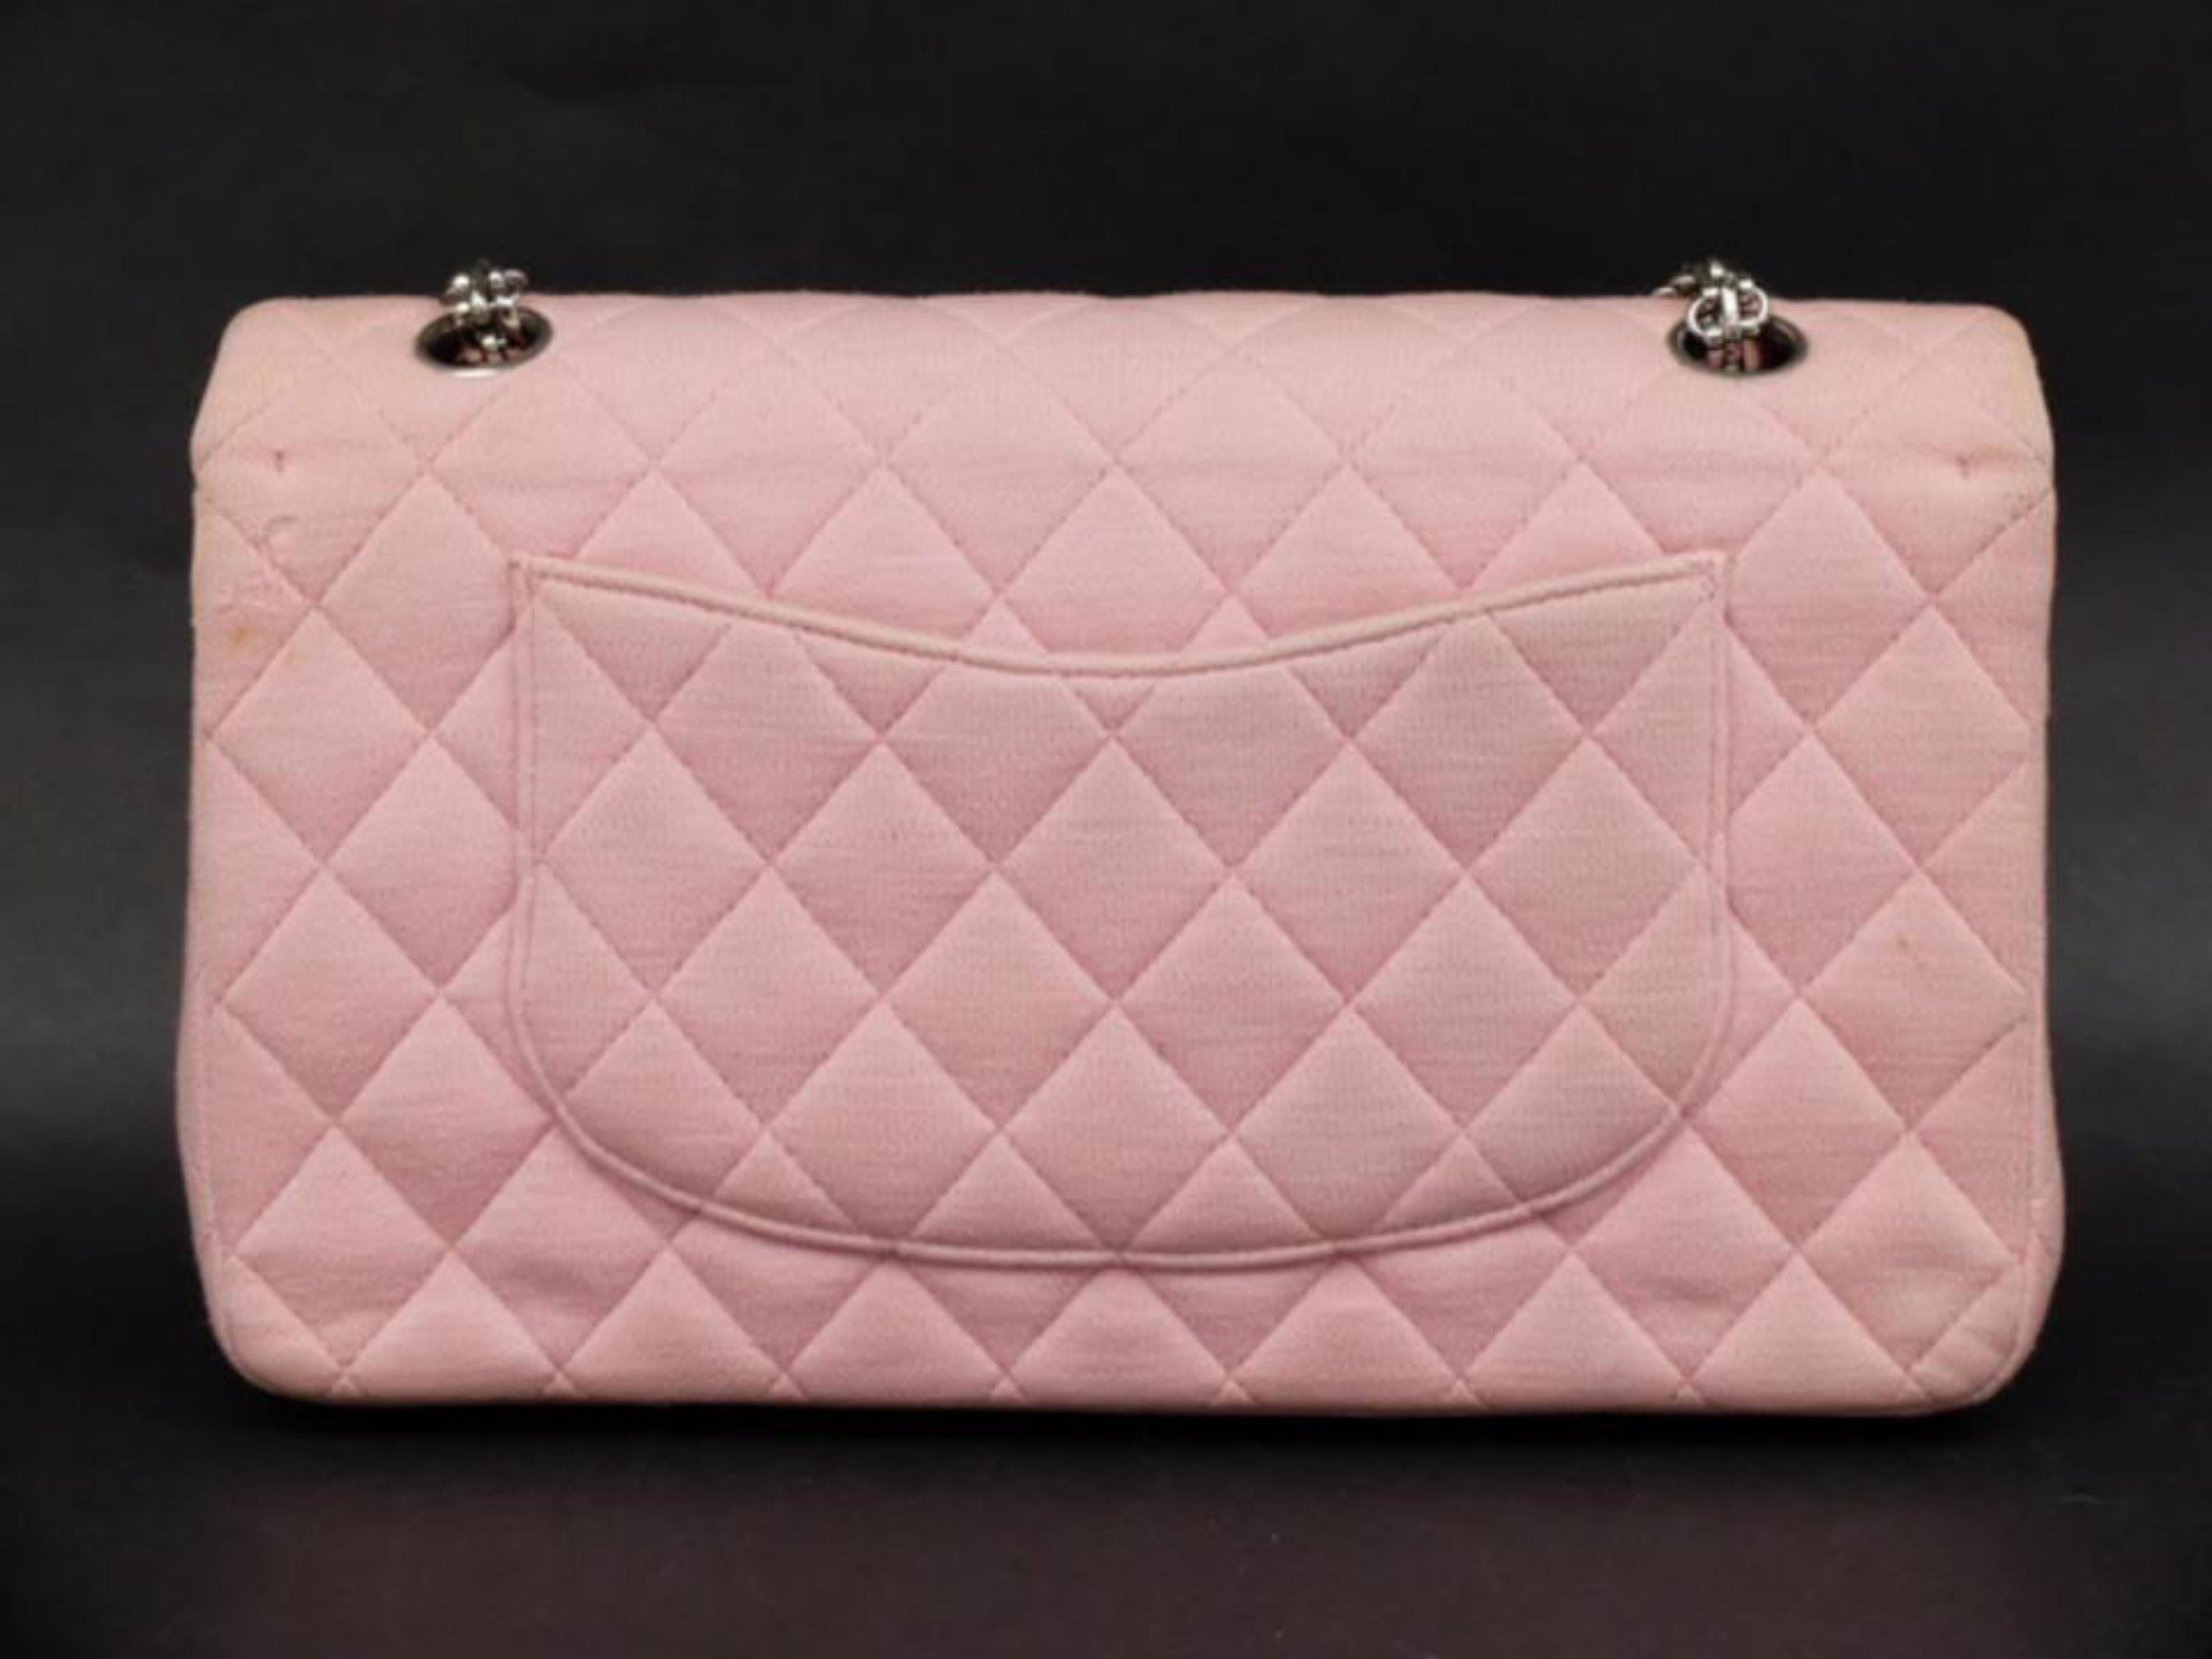 Chanel Mademoiselle Classic Flap Medium Quilted 231621 Pink Cotton Shoulder Bag For Sale 3